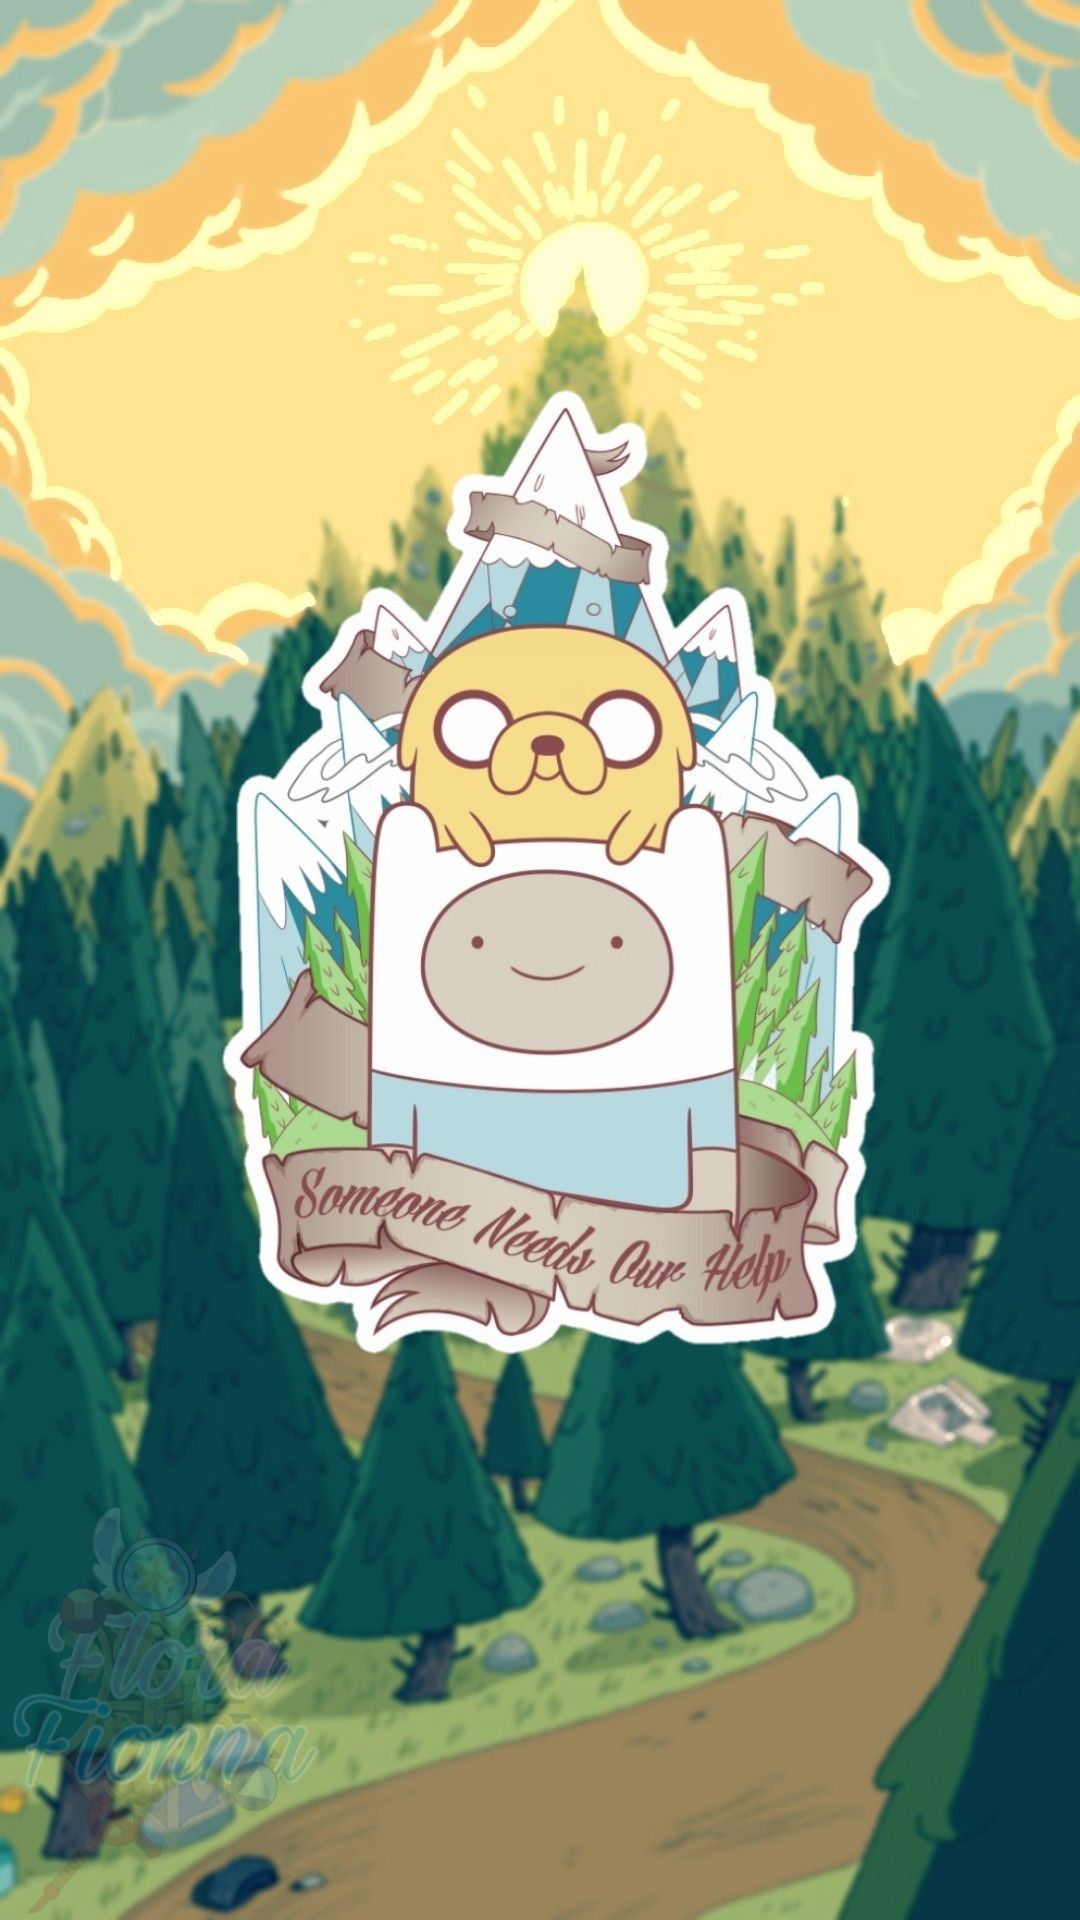 Aesthetic Adventure Time Wallpaper Mobile, Top Wallpaper Time Wallpaper Phone HD Wallpaper